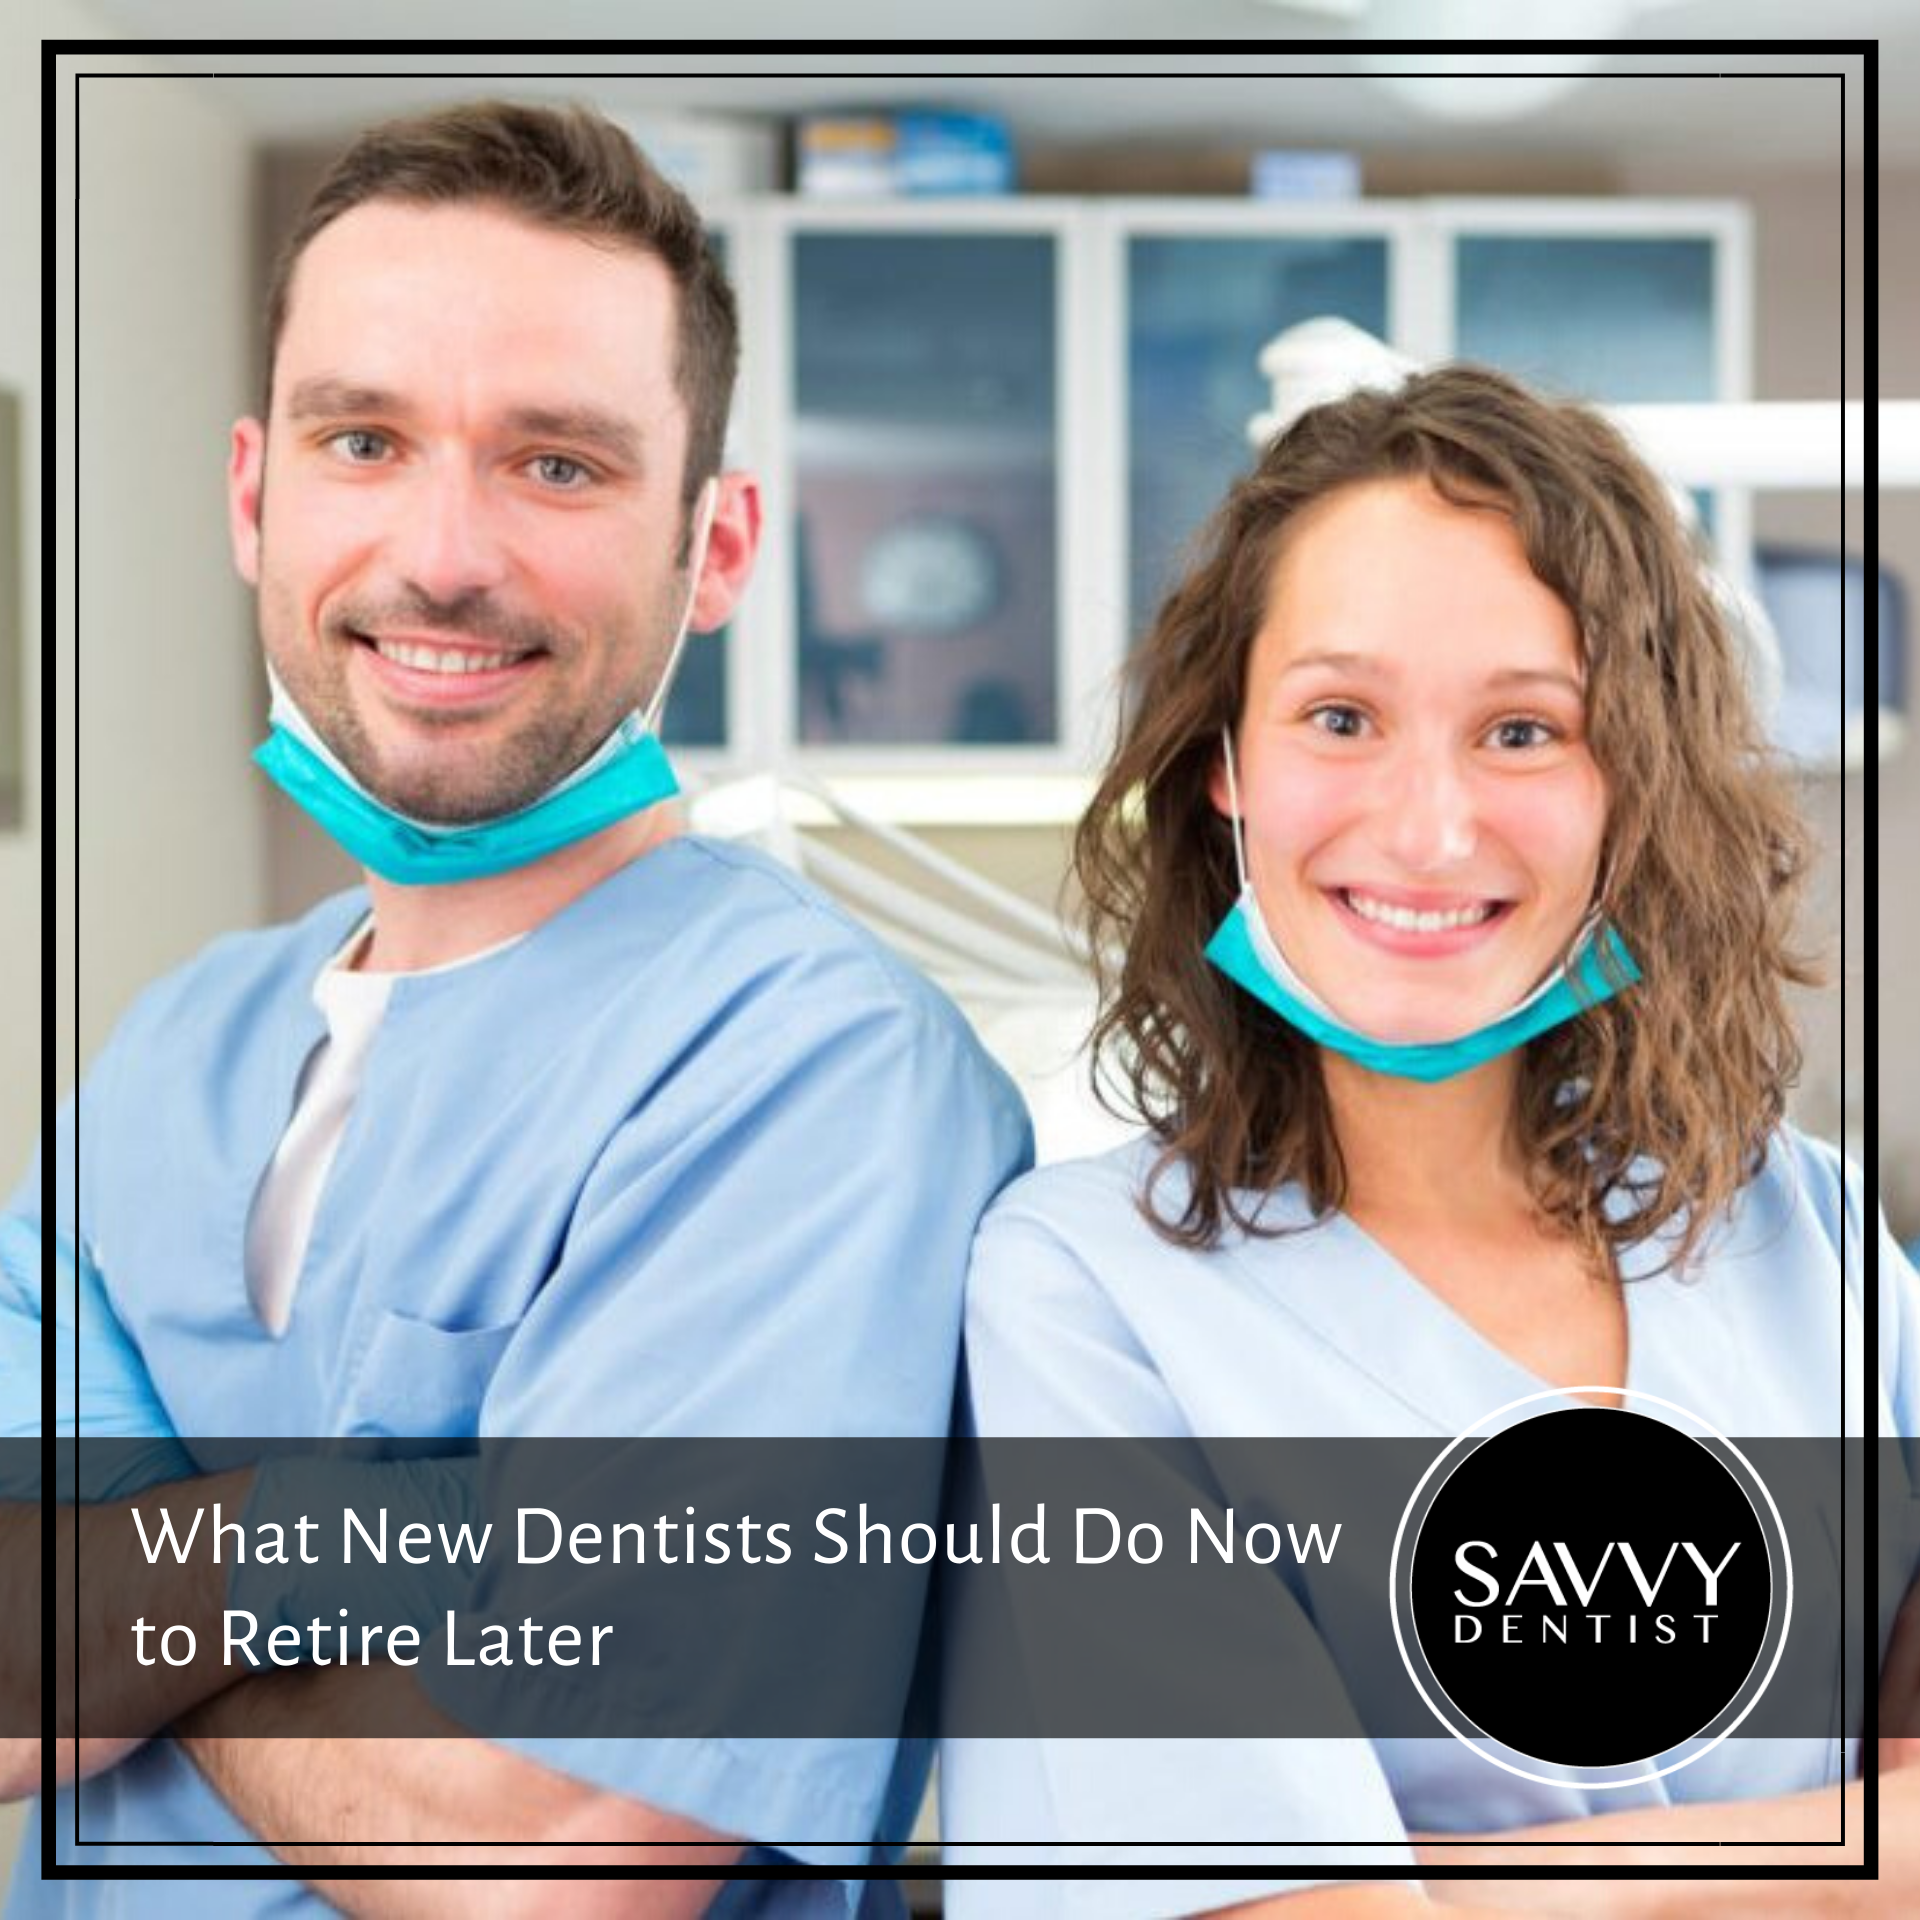 What New Dentists Should Do Now to Retire Later